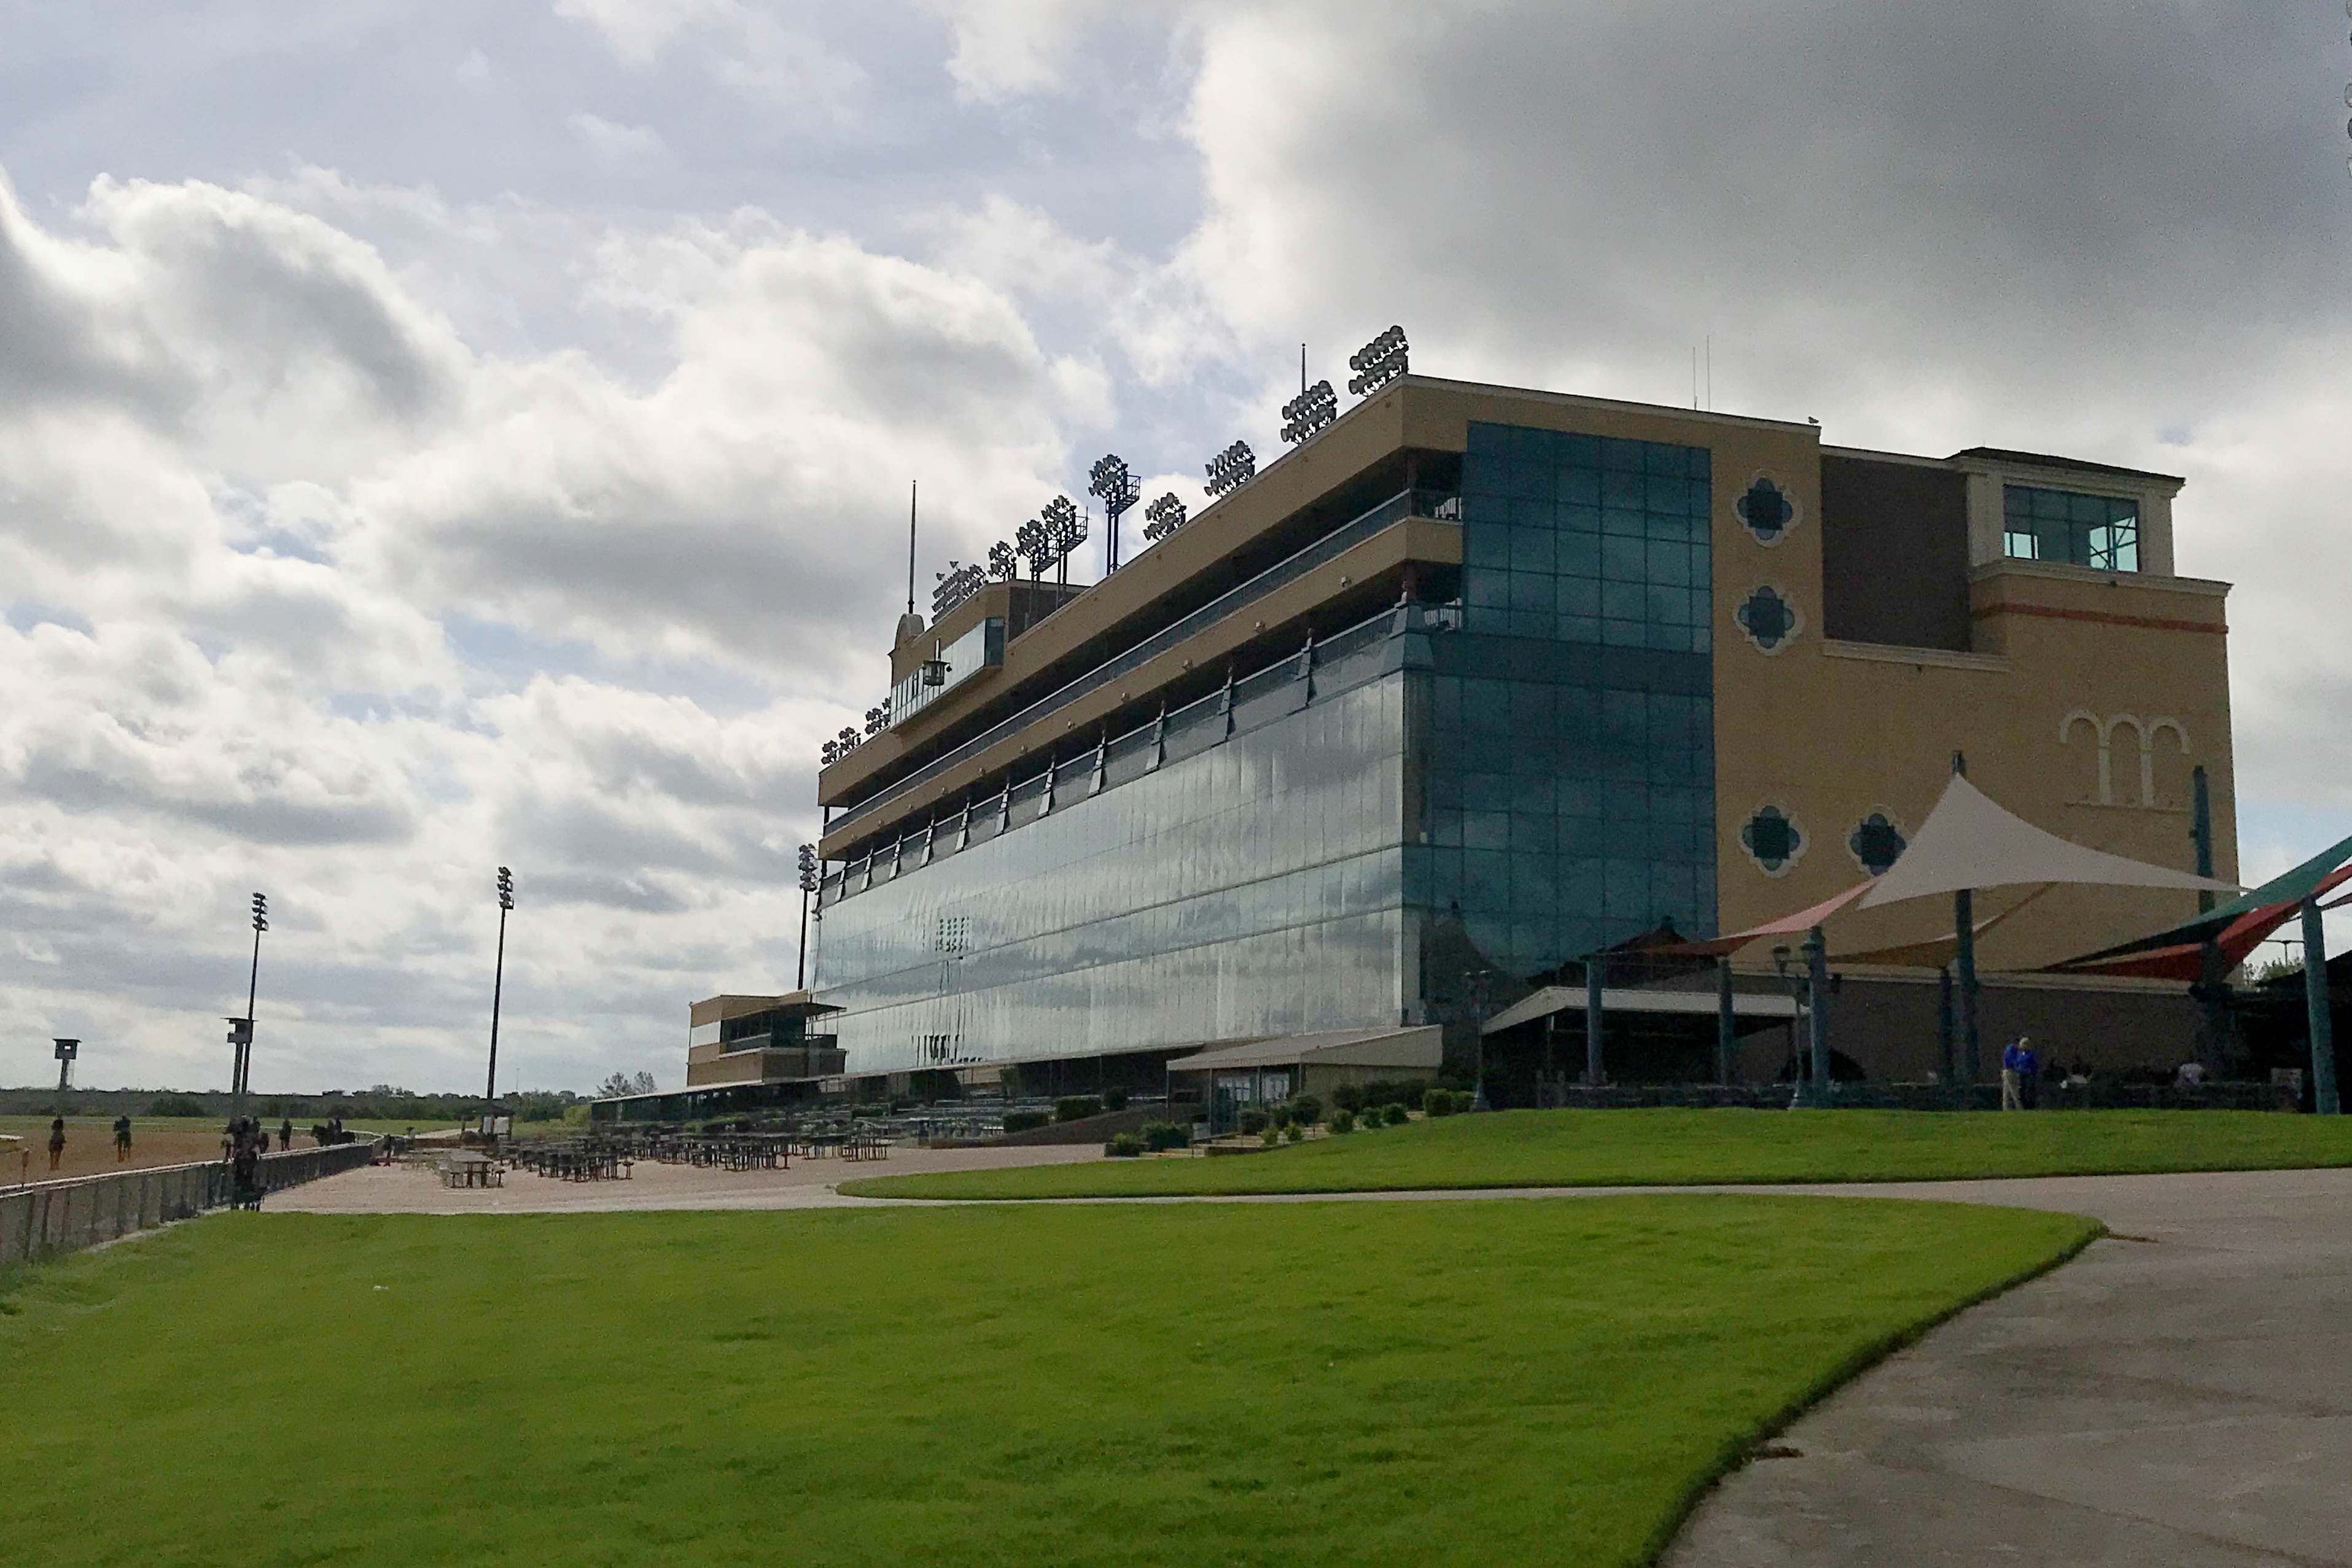 Lone Star Park Offers Exciting Live Horse Racing and Wagering